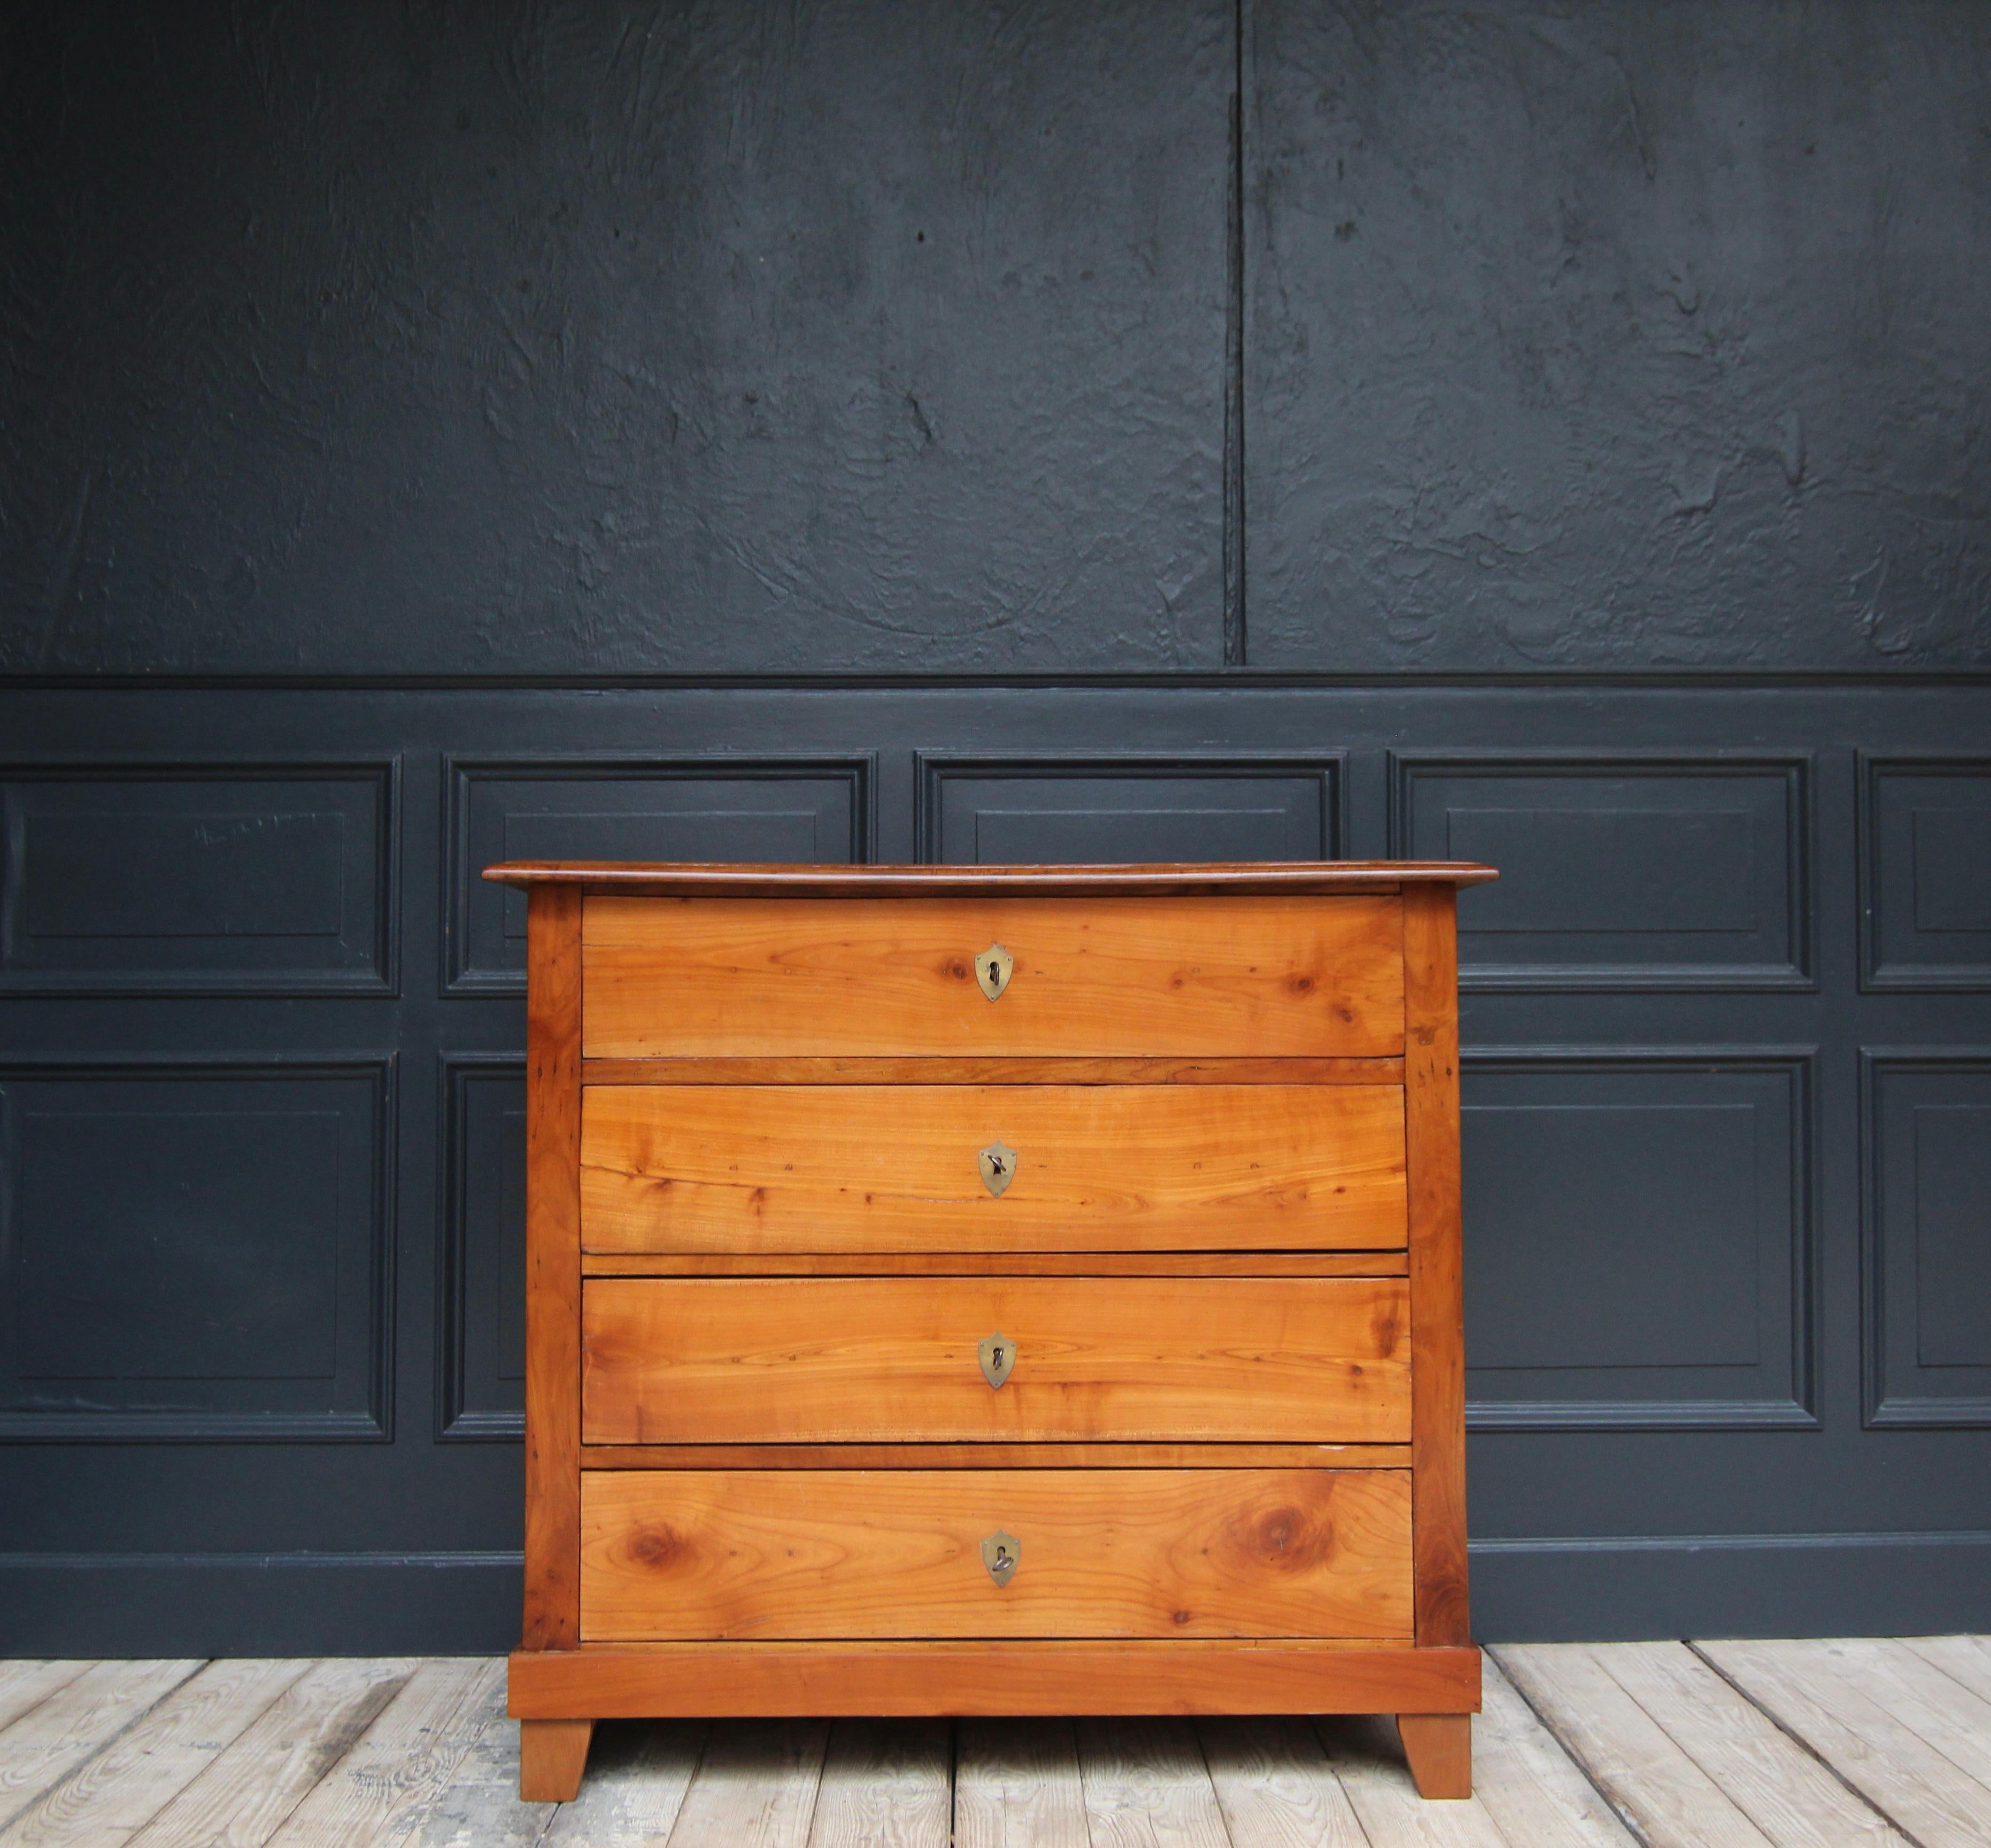 A German late-biedermeier cherrywood chest of drawers from the 2nd half of the 19th century. 

Plain cherrywood body with coffered sides, 4 drawers and slightly protruding moulded top panel.

Original locks.

Brass key plates in the shape of coats